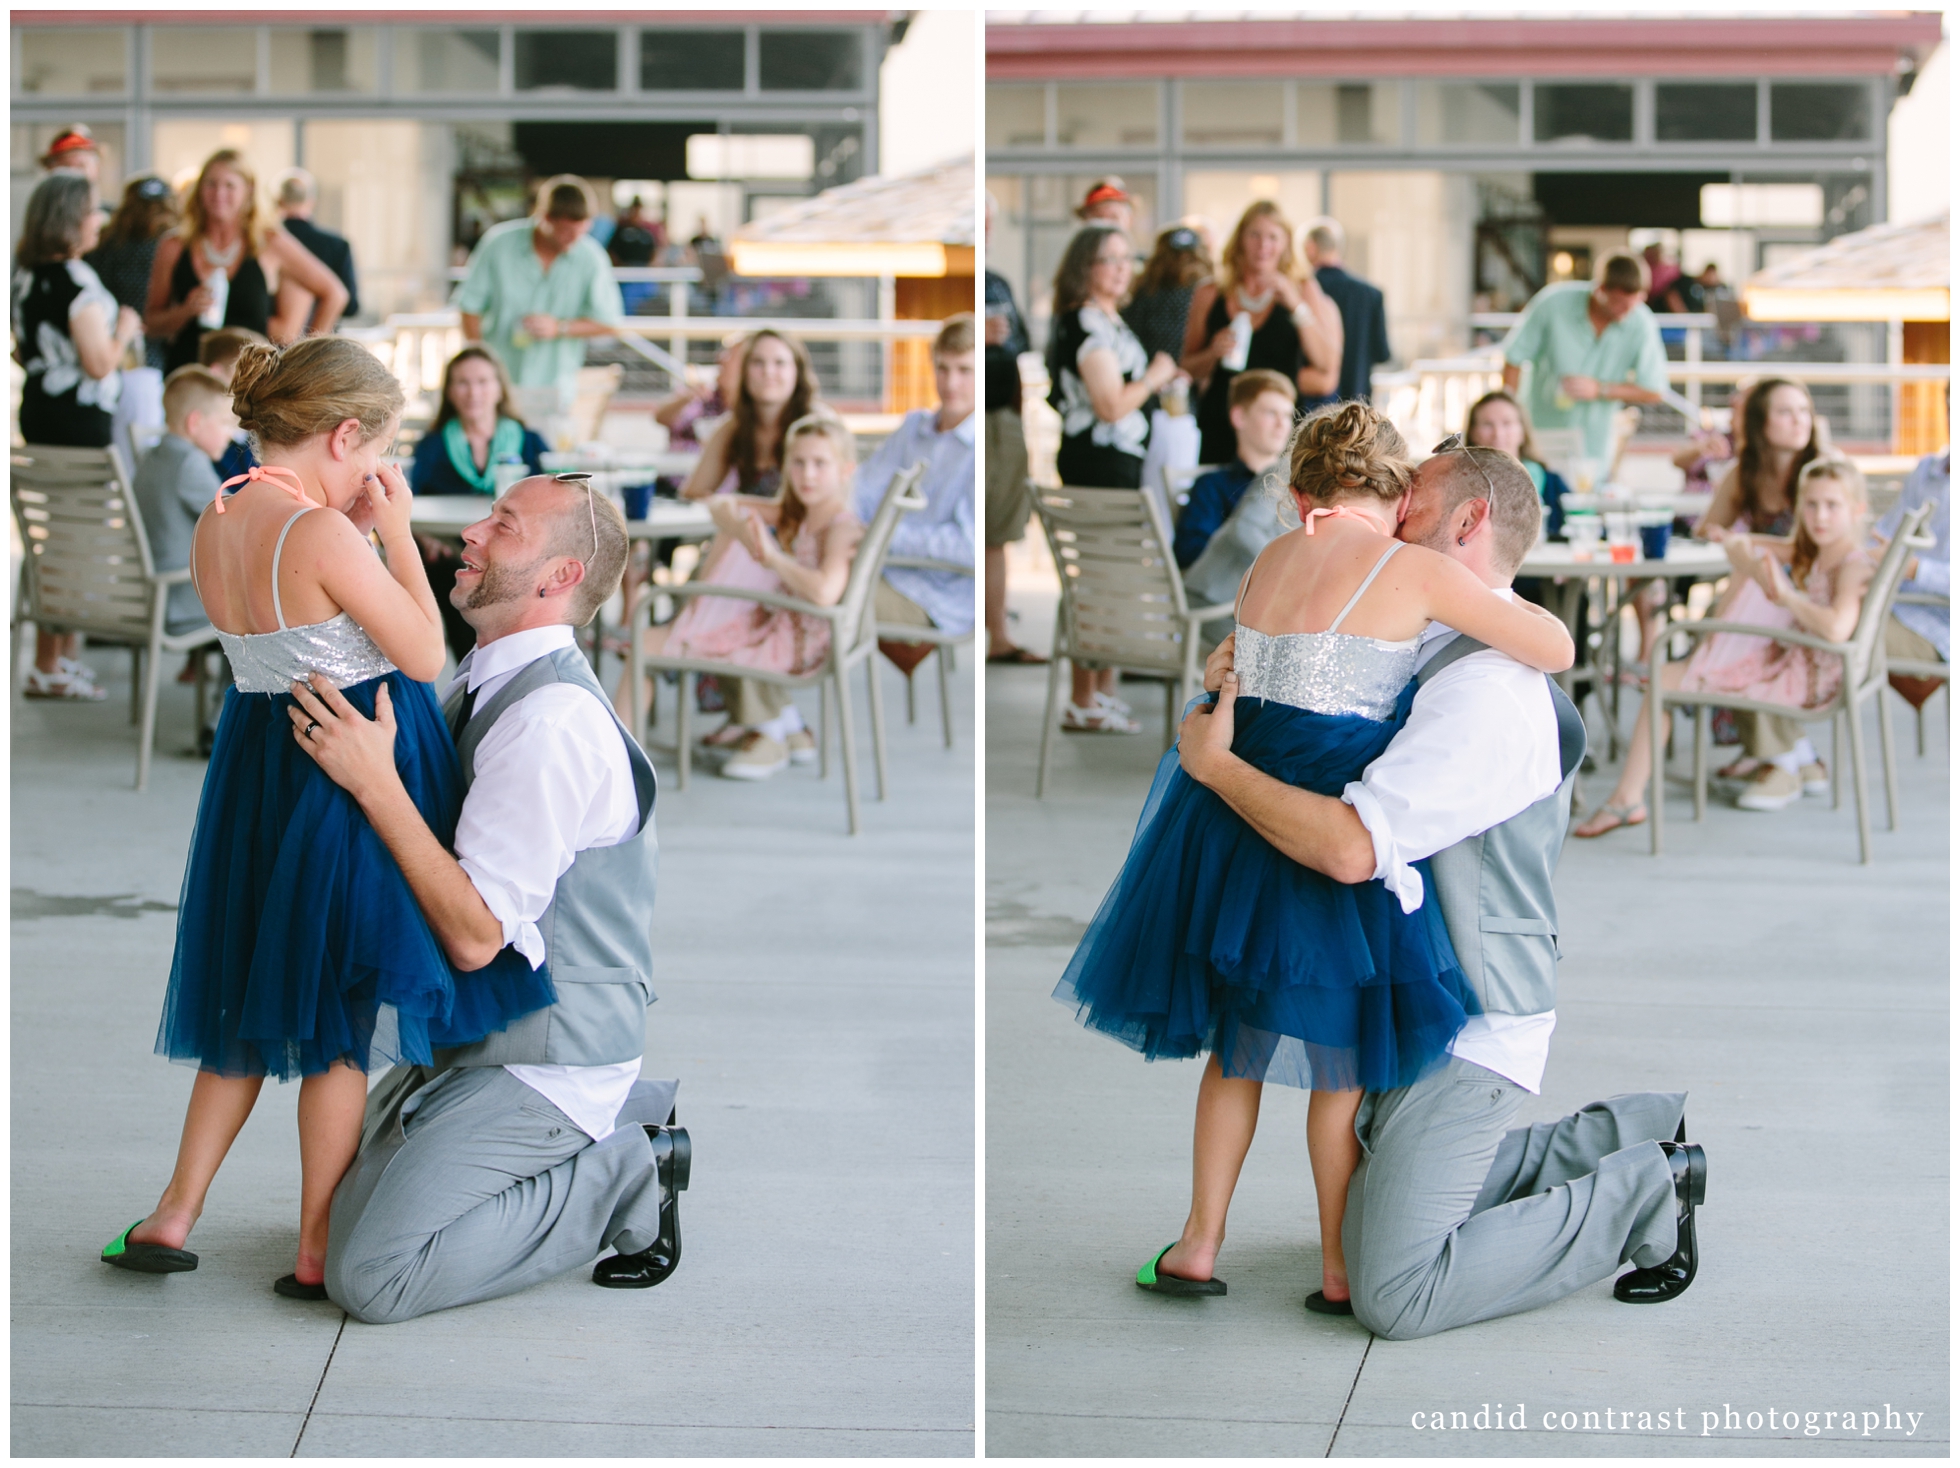 father daughter dance with a young daughter at a bellevue iowa outdoor wedding at the shore event center, iowa wedding photographer candid contrast photography